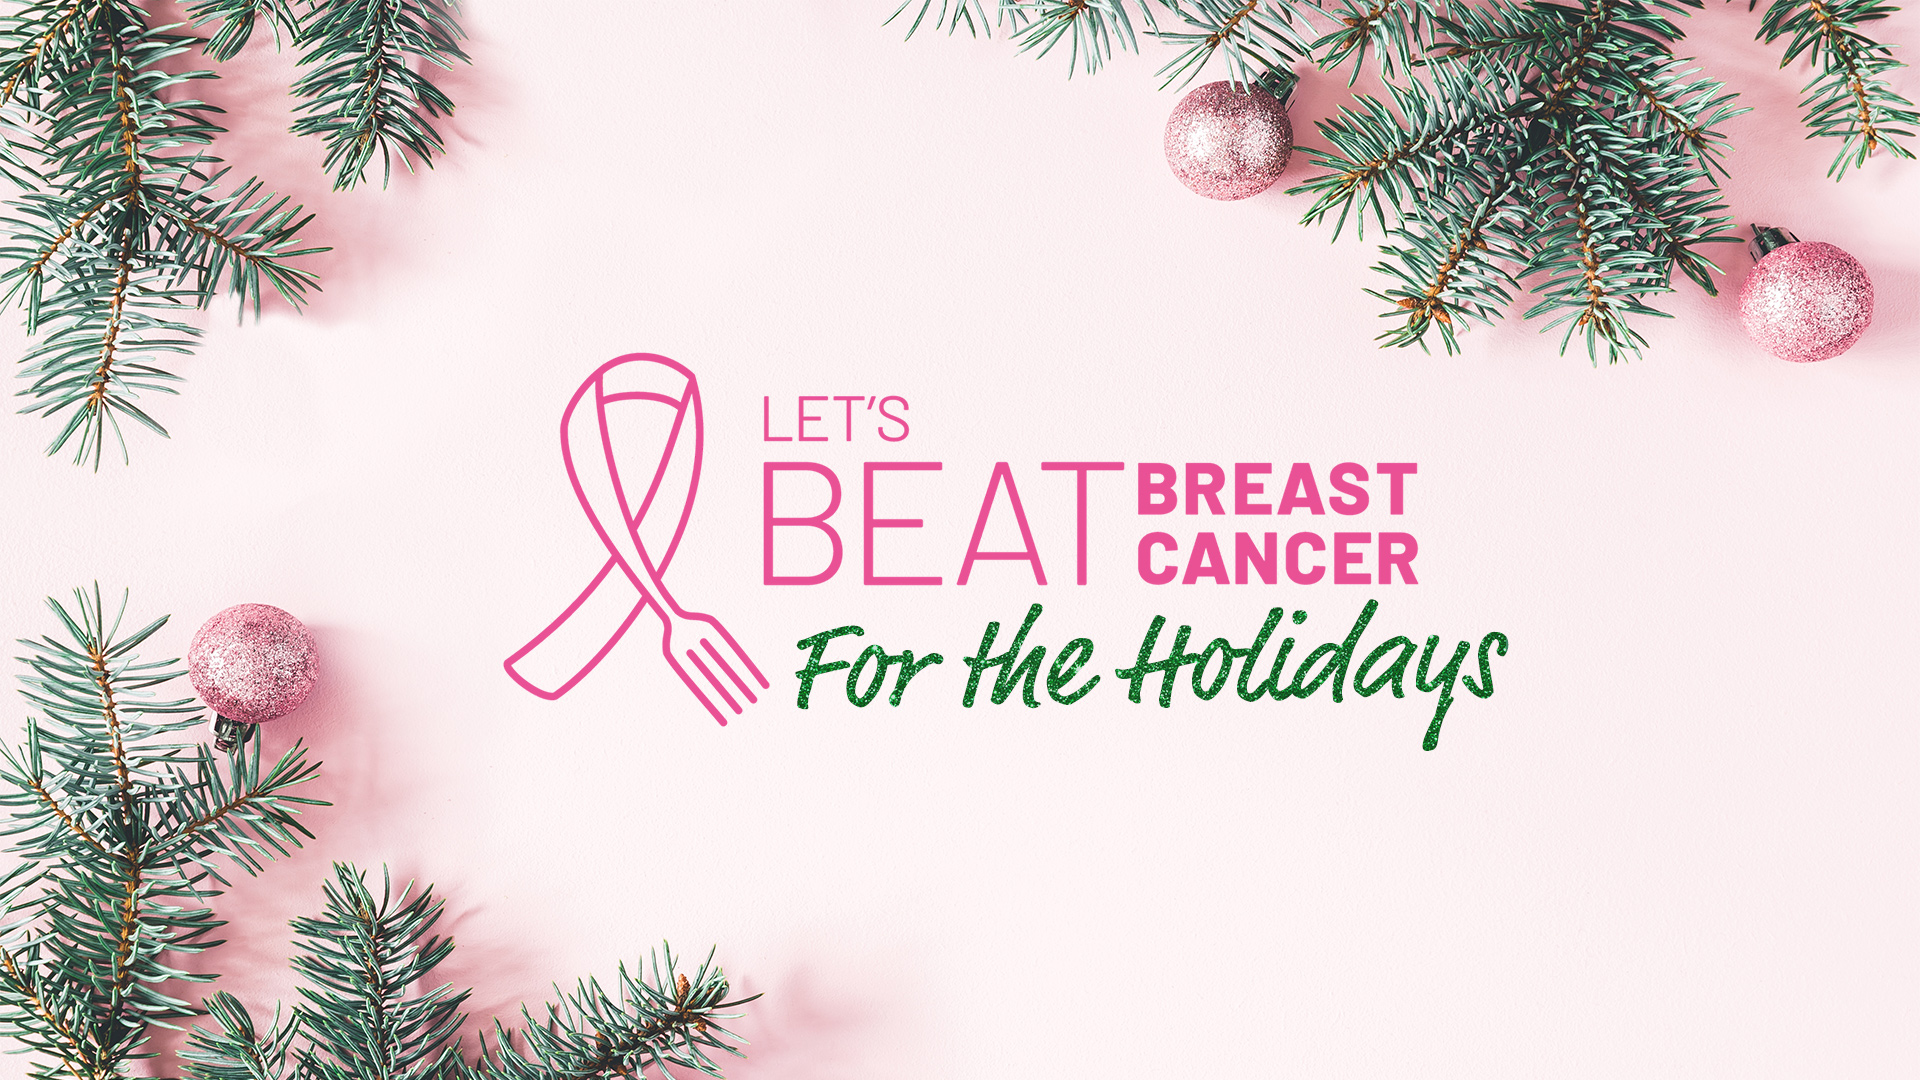 Reduce Your Risk for Breast Cancer this Holiday Season